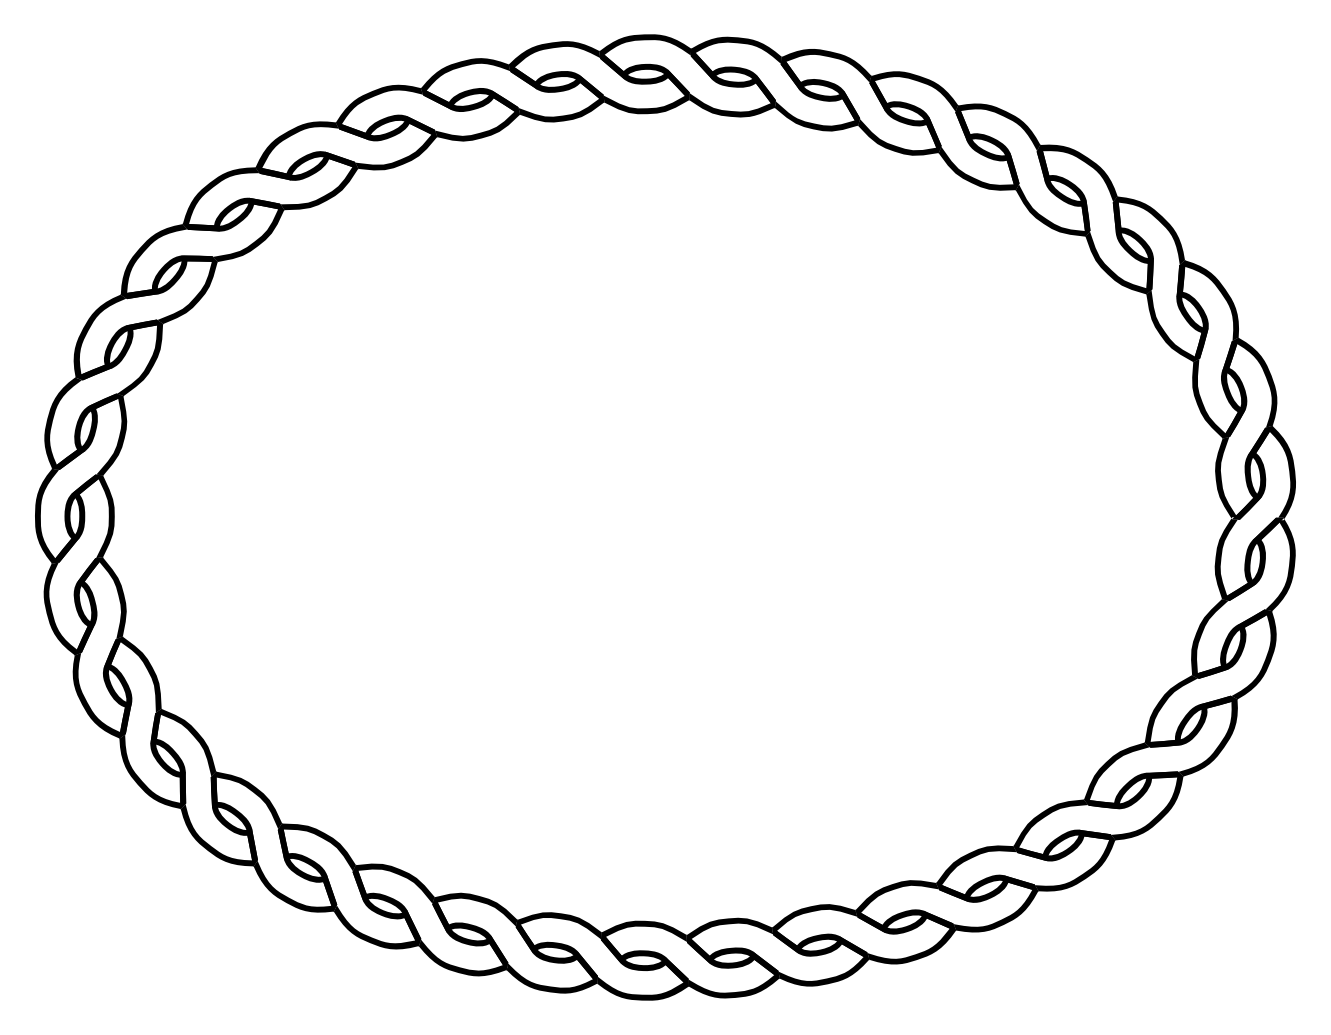 Nautical clipart page borders. Black and white coloring